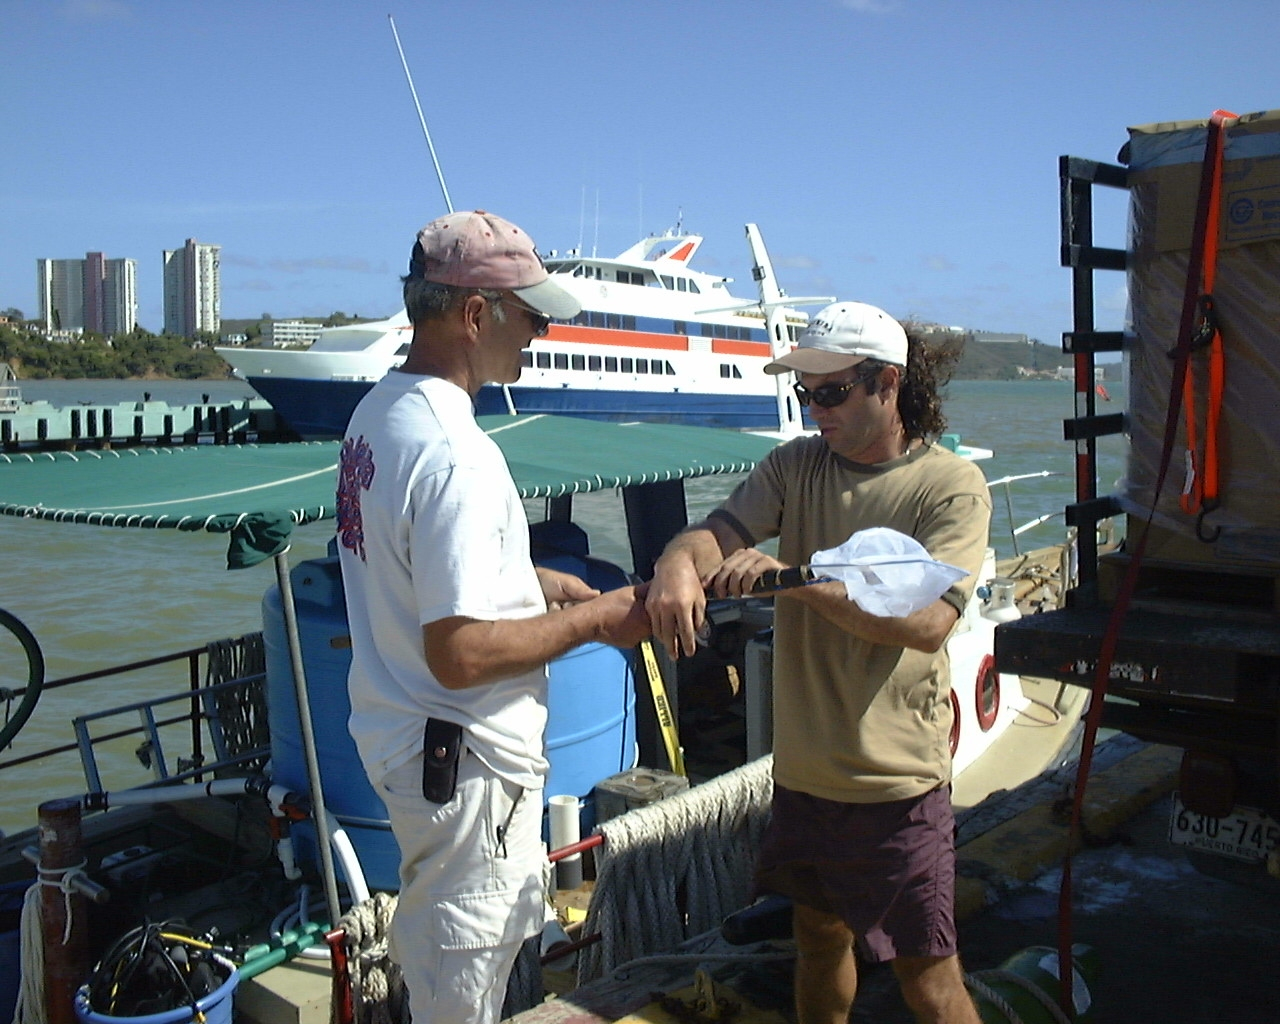 Handnets and gear being loaded in preparation for Florida cultured cobia(Rachycentron candum) stocking in offshore cages in Puerto Rico